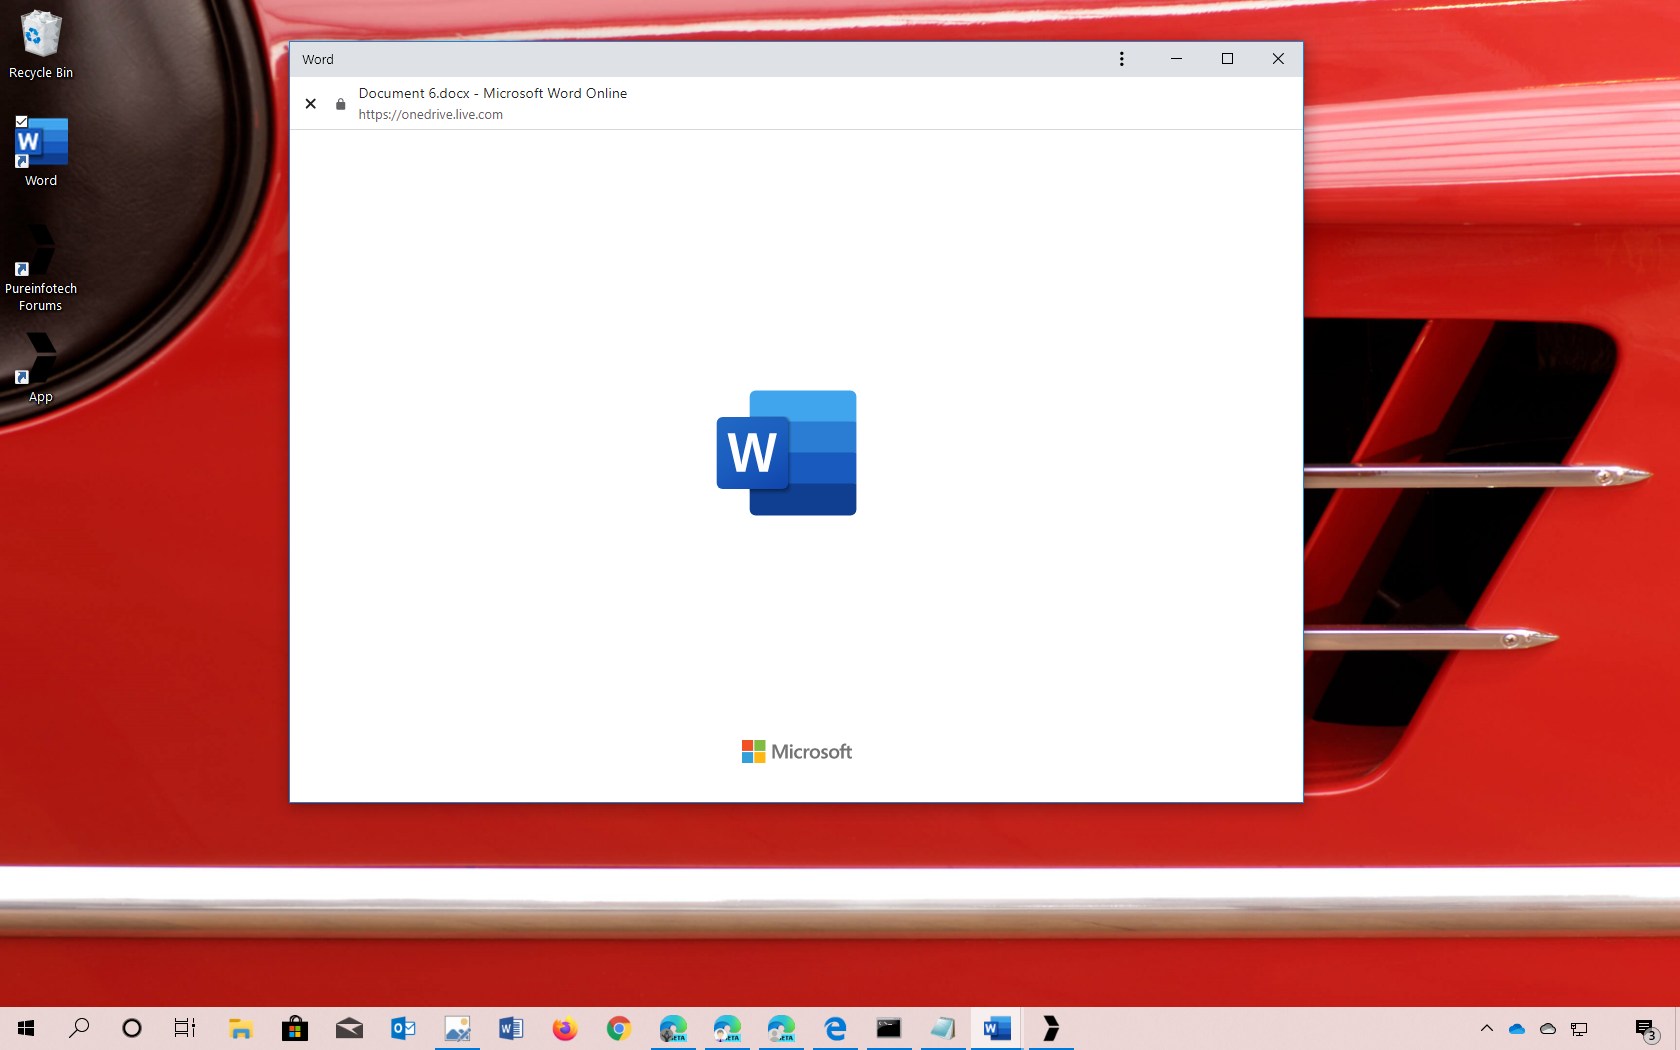 How to install Office web apps using Chrome on Windows 10 - Pureinfotech